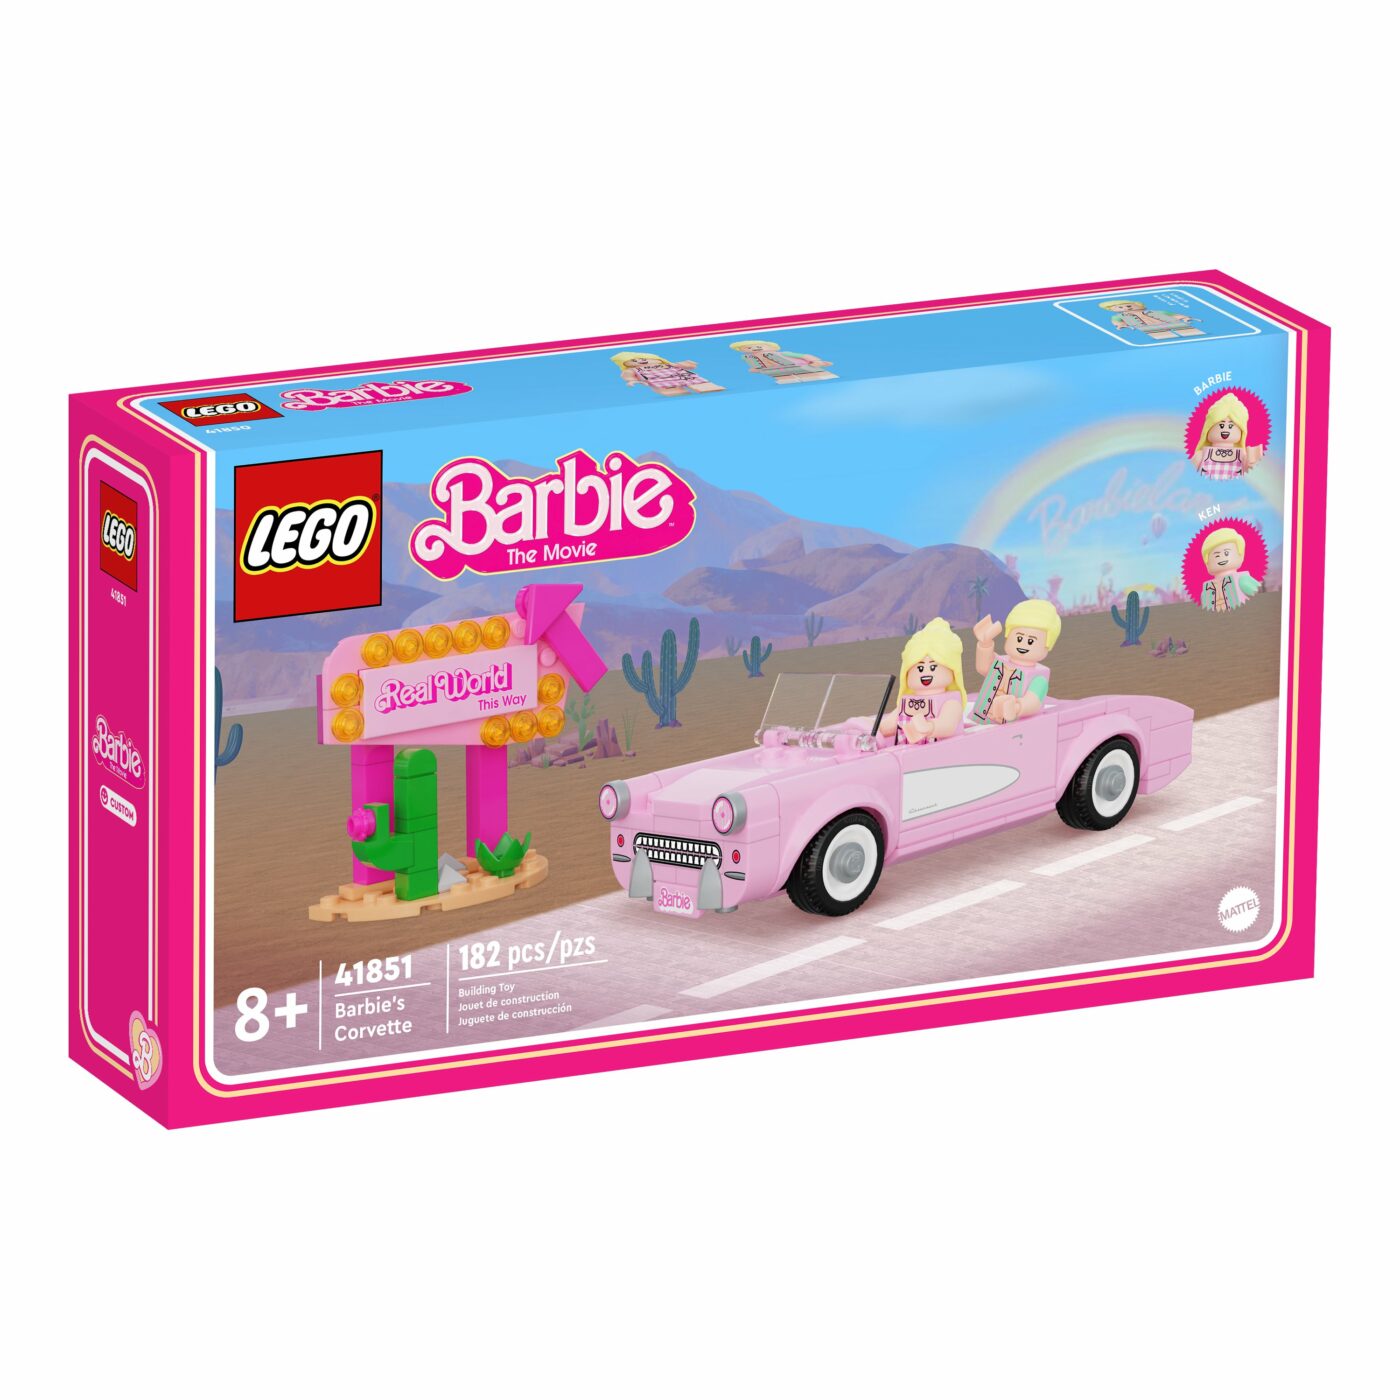 Here’s what a LEGO Barbie Movie theme could look like13